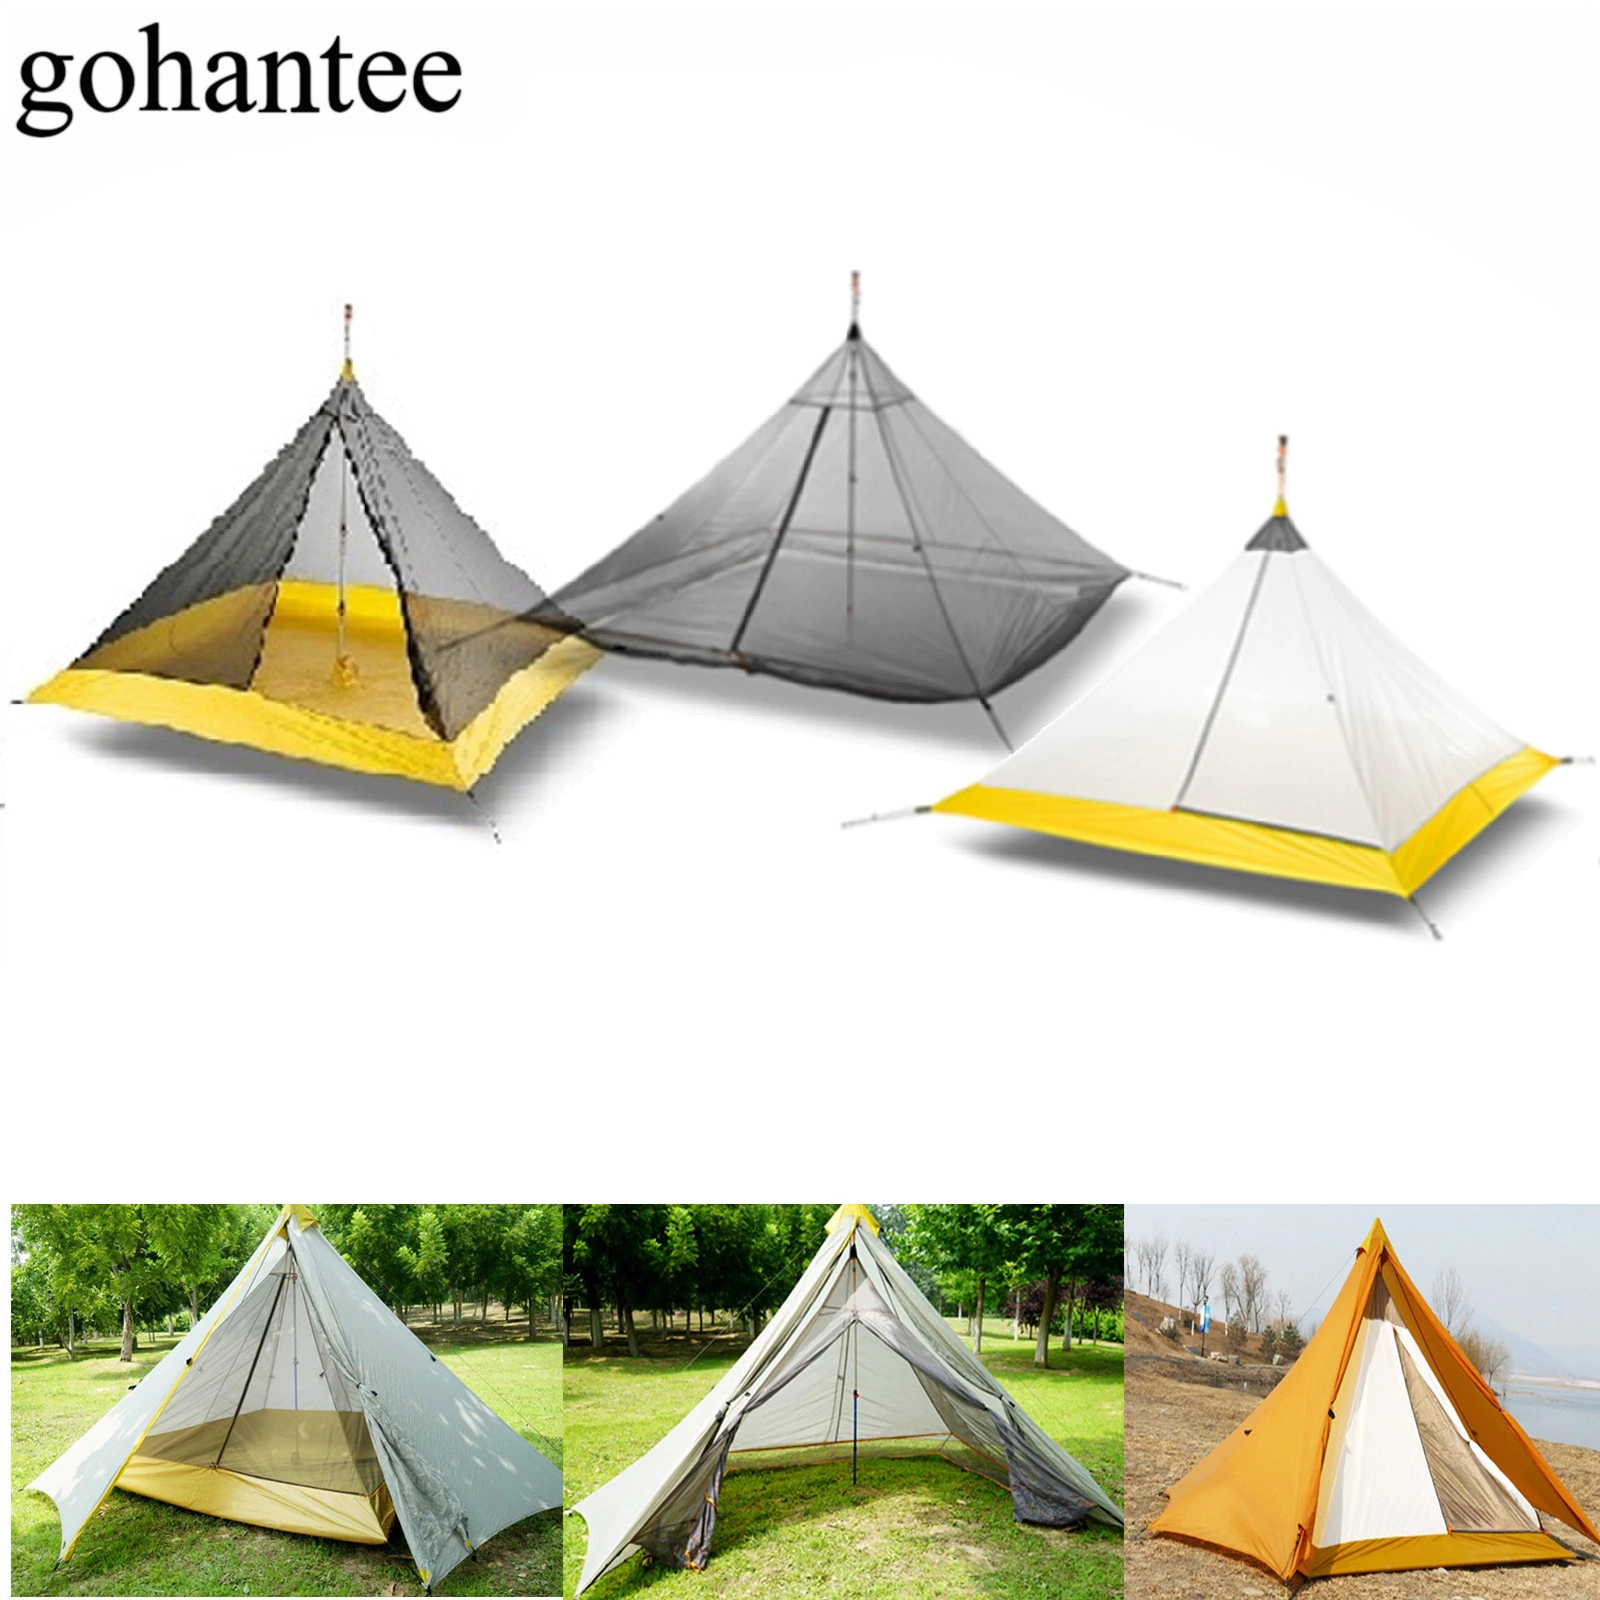 Cheap Goat Tents Ultralight Camping Tent 3 4 Person Outdoor 40D Nylon Silicone Coated Rodless Pyramid Large Tent Breathable 3 4 Season Inner Tent Tents